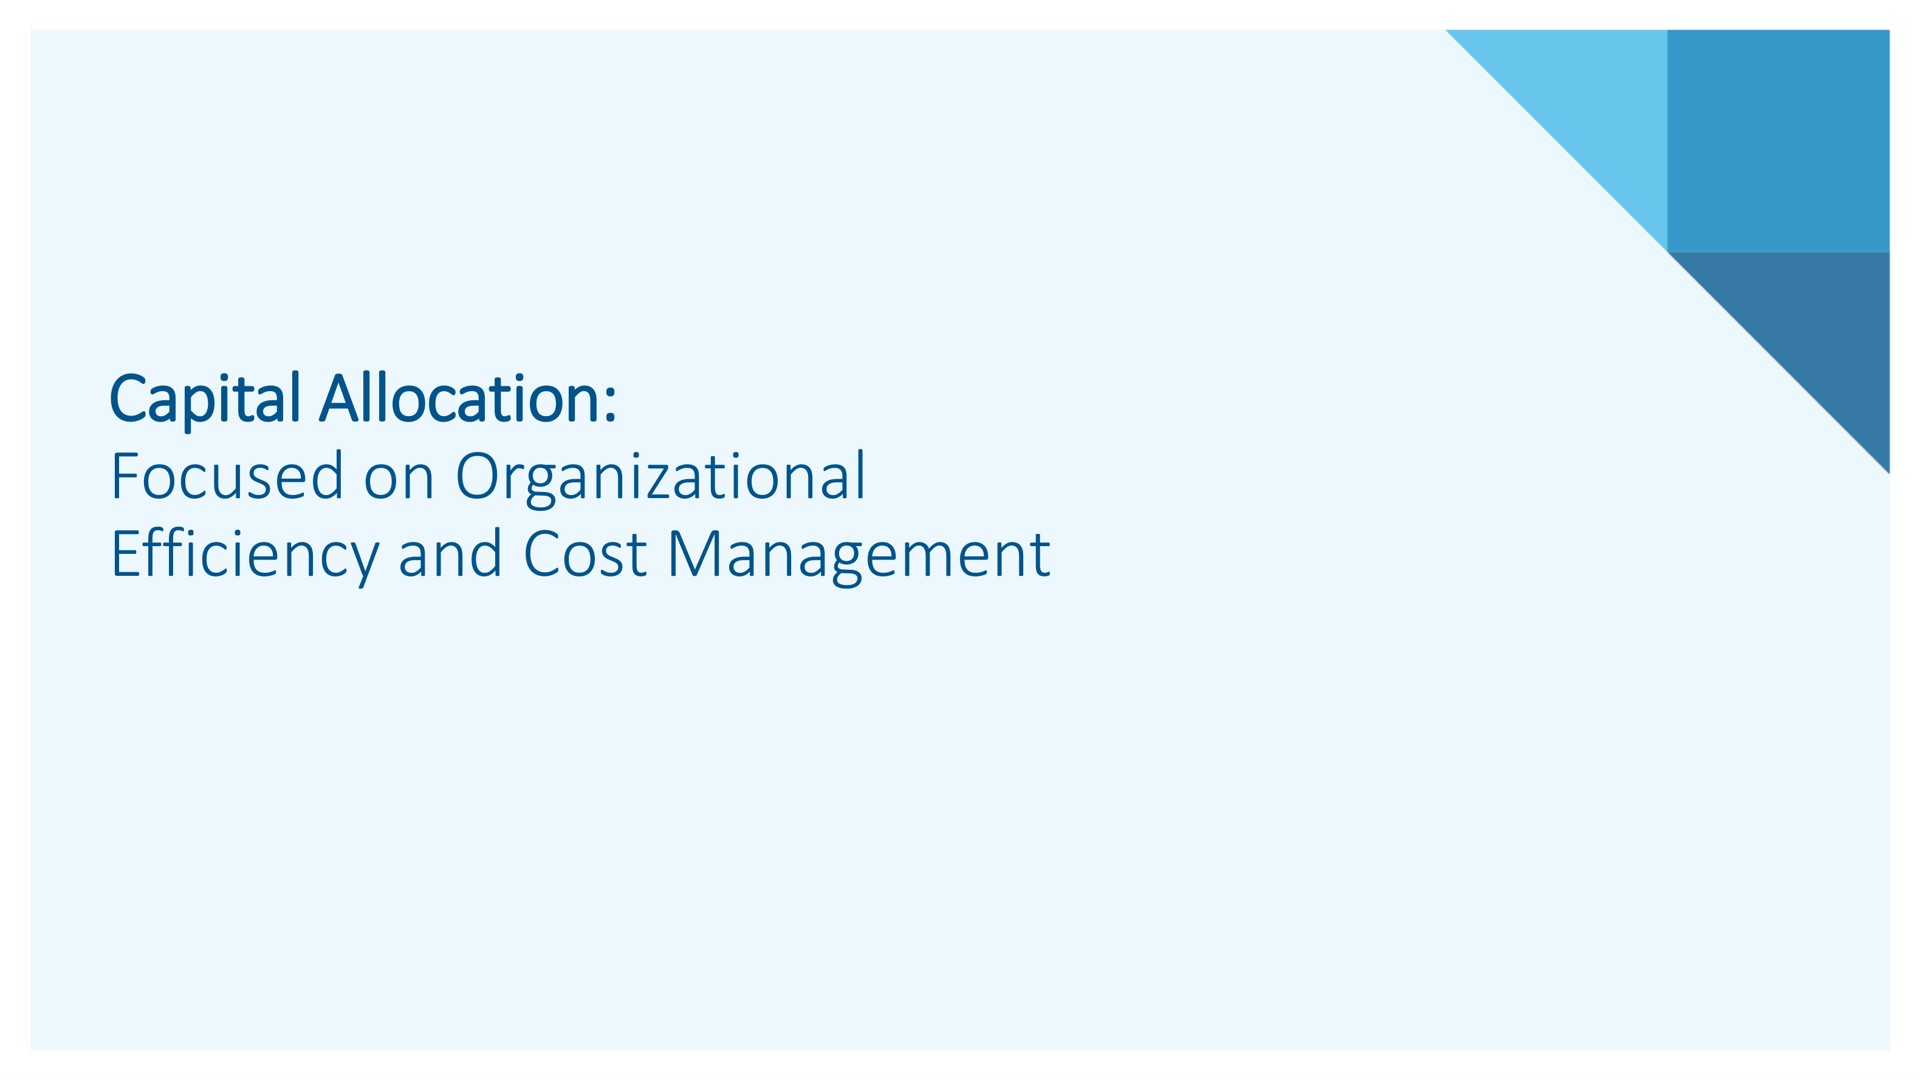 capital allocation focused on organizational efficiency and cost management | Alkermes